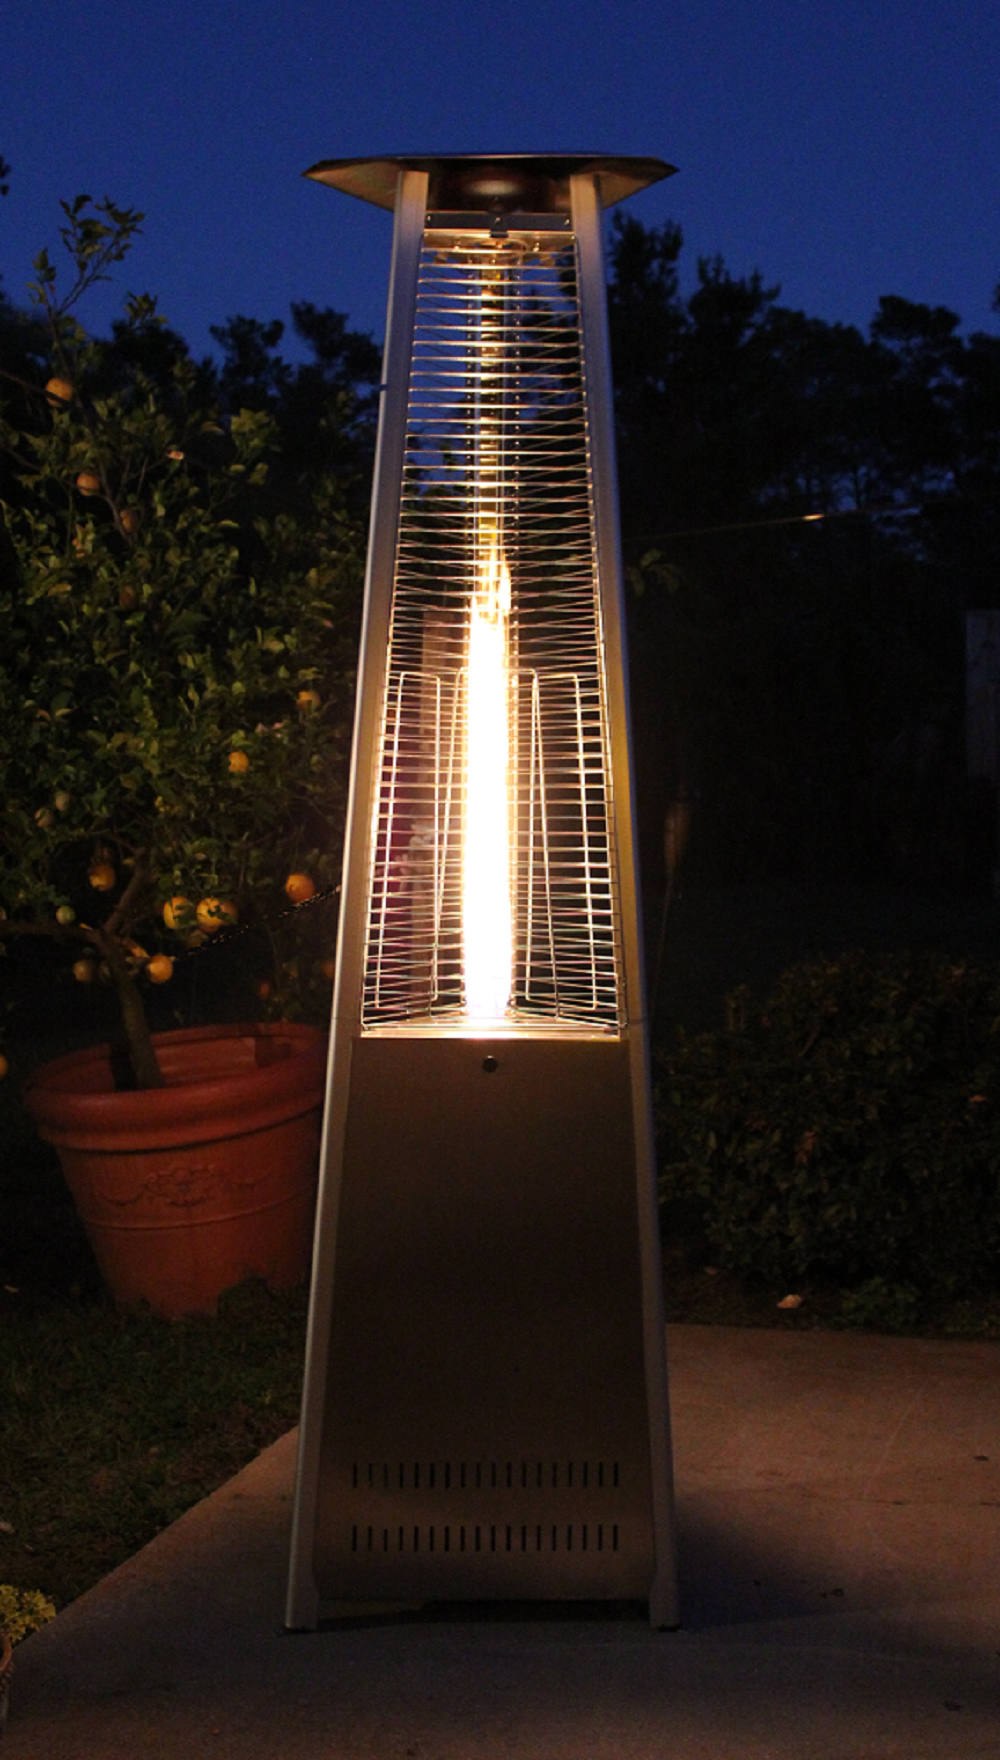 Hiland 94" Tall Commercial Triangle Glass Tube Heater -Stainless Steel- Lifestyle Outdoor